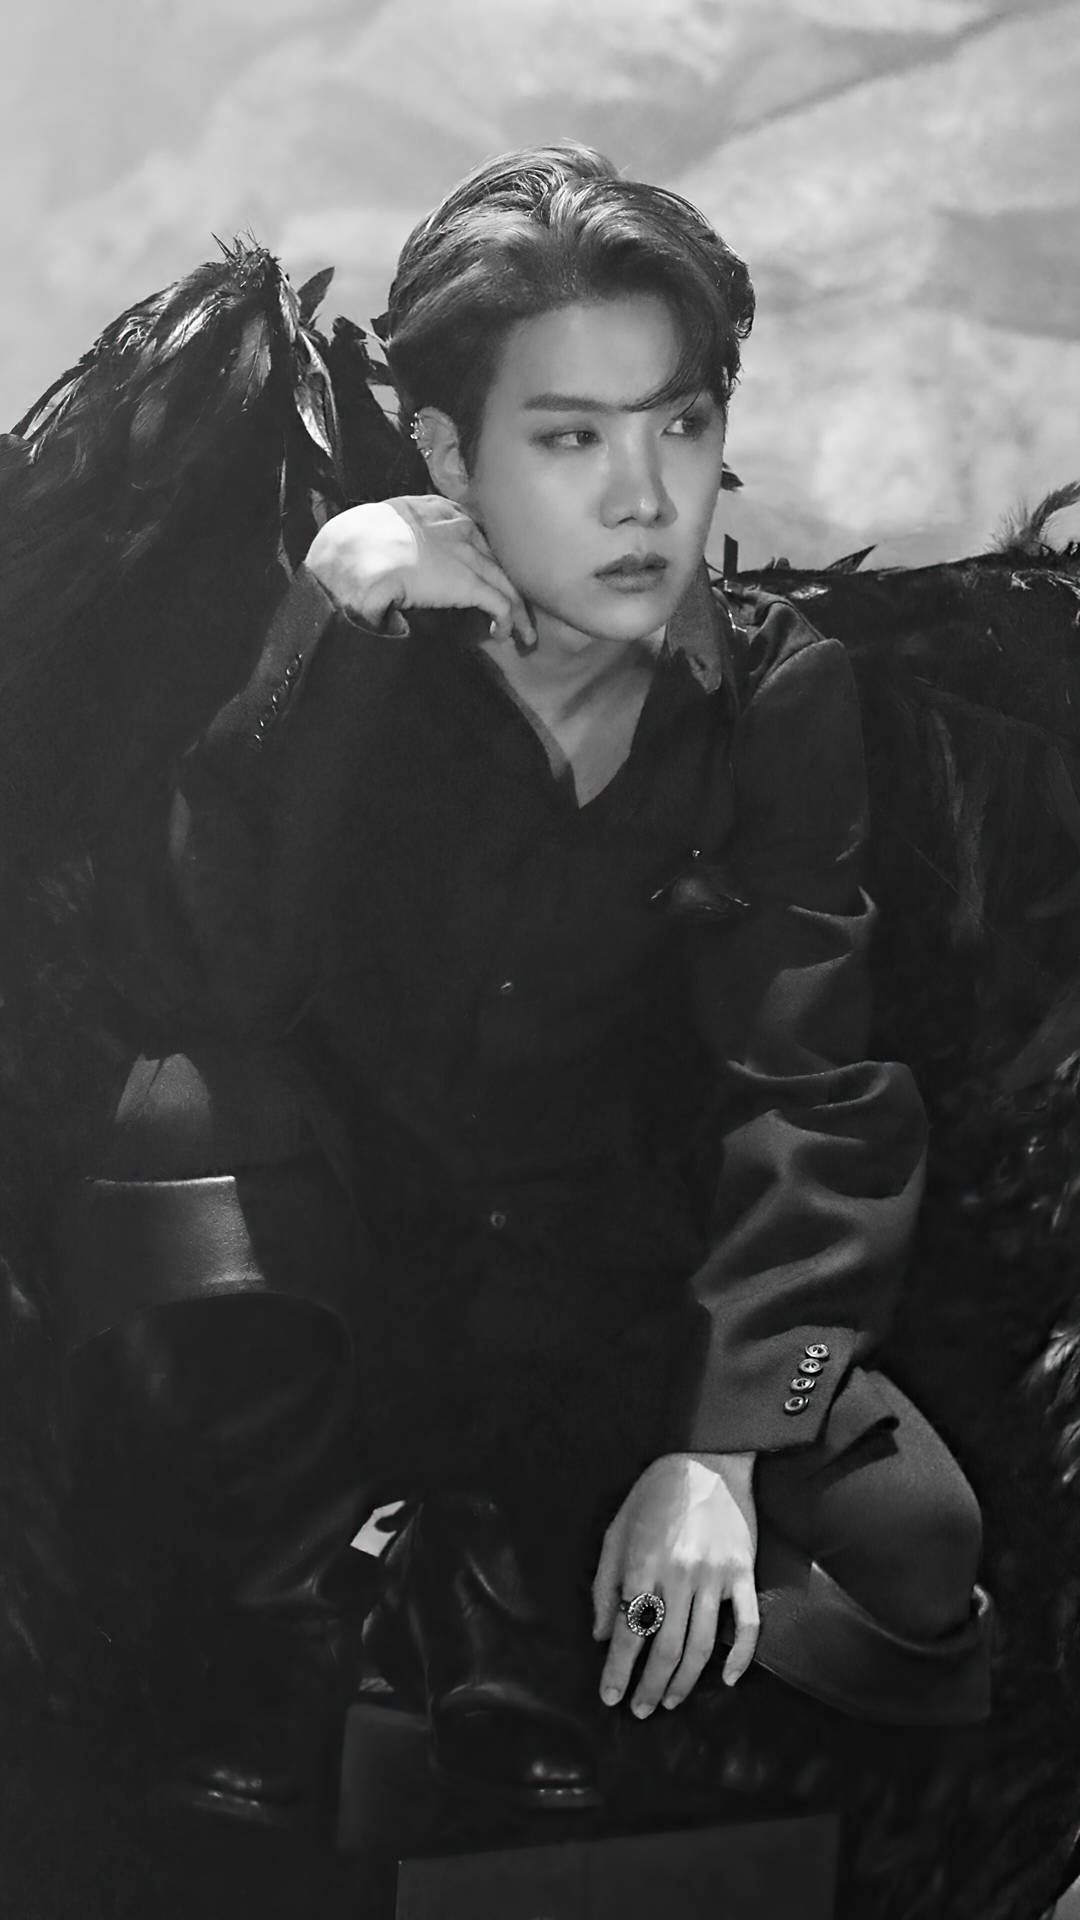 J-hope In Black And White